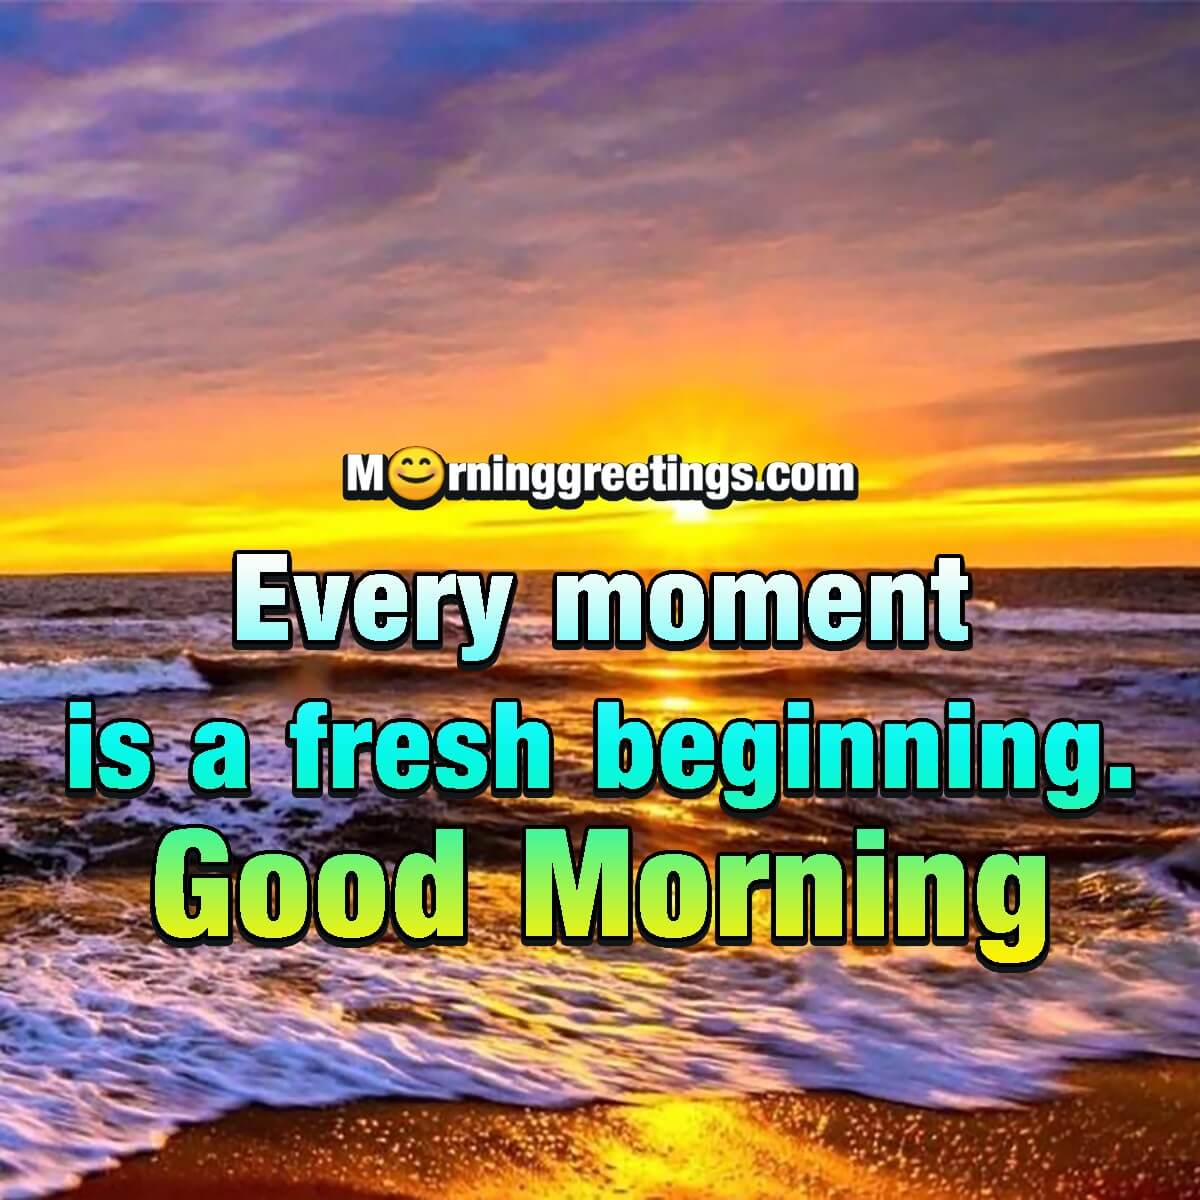 Good Morning Every Moment Is A Fresh Beginning